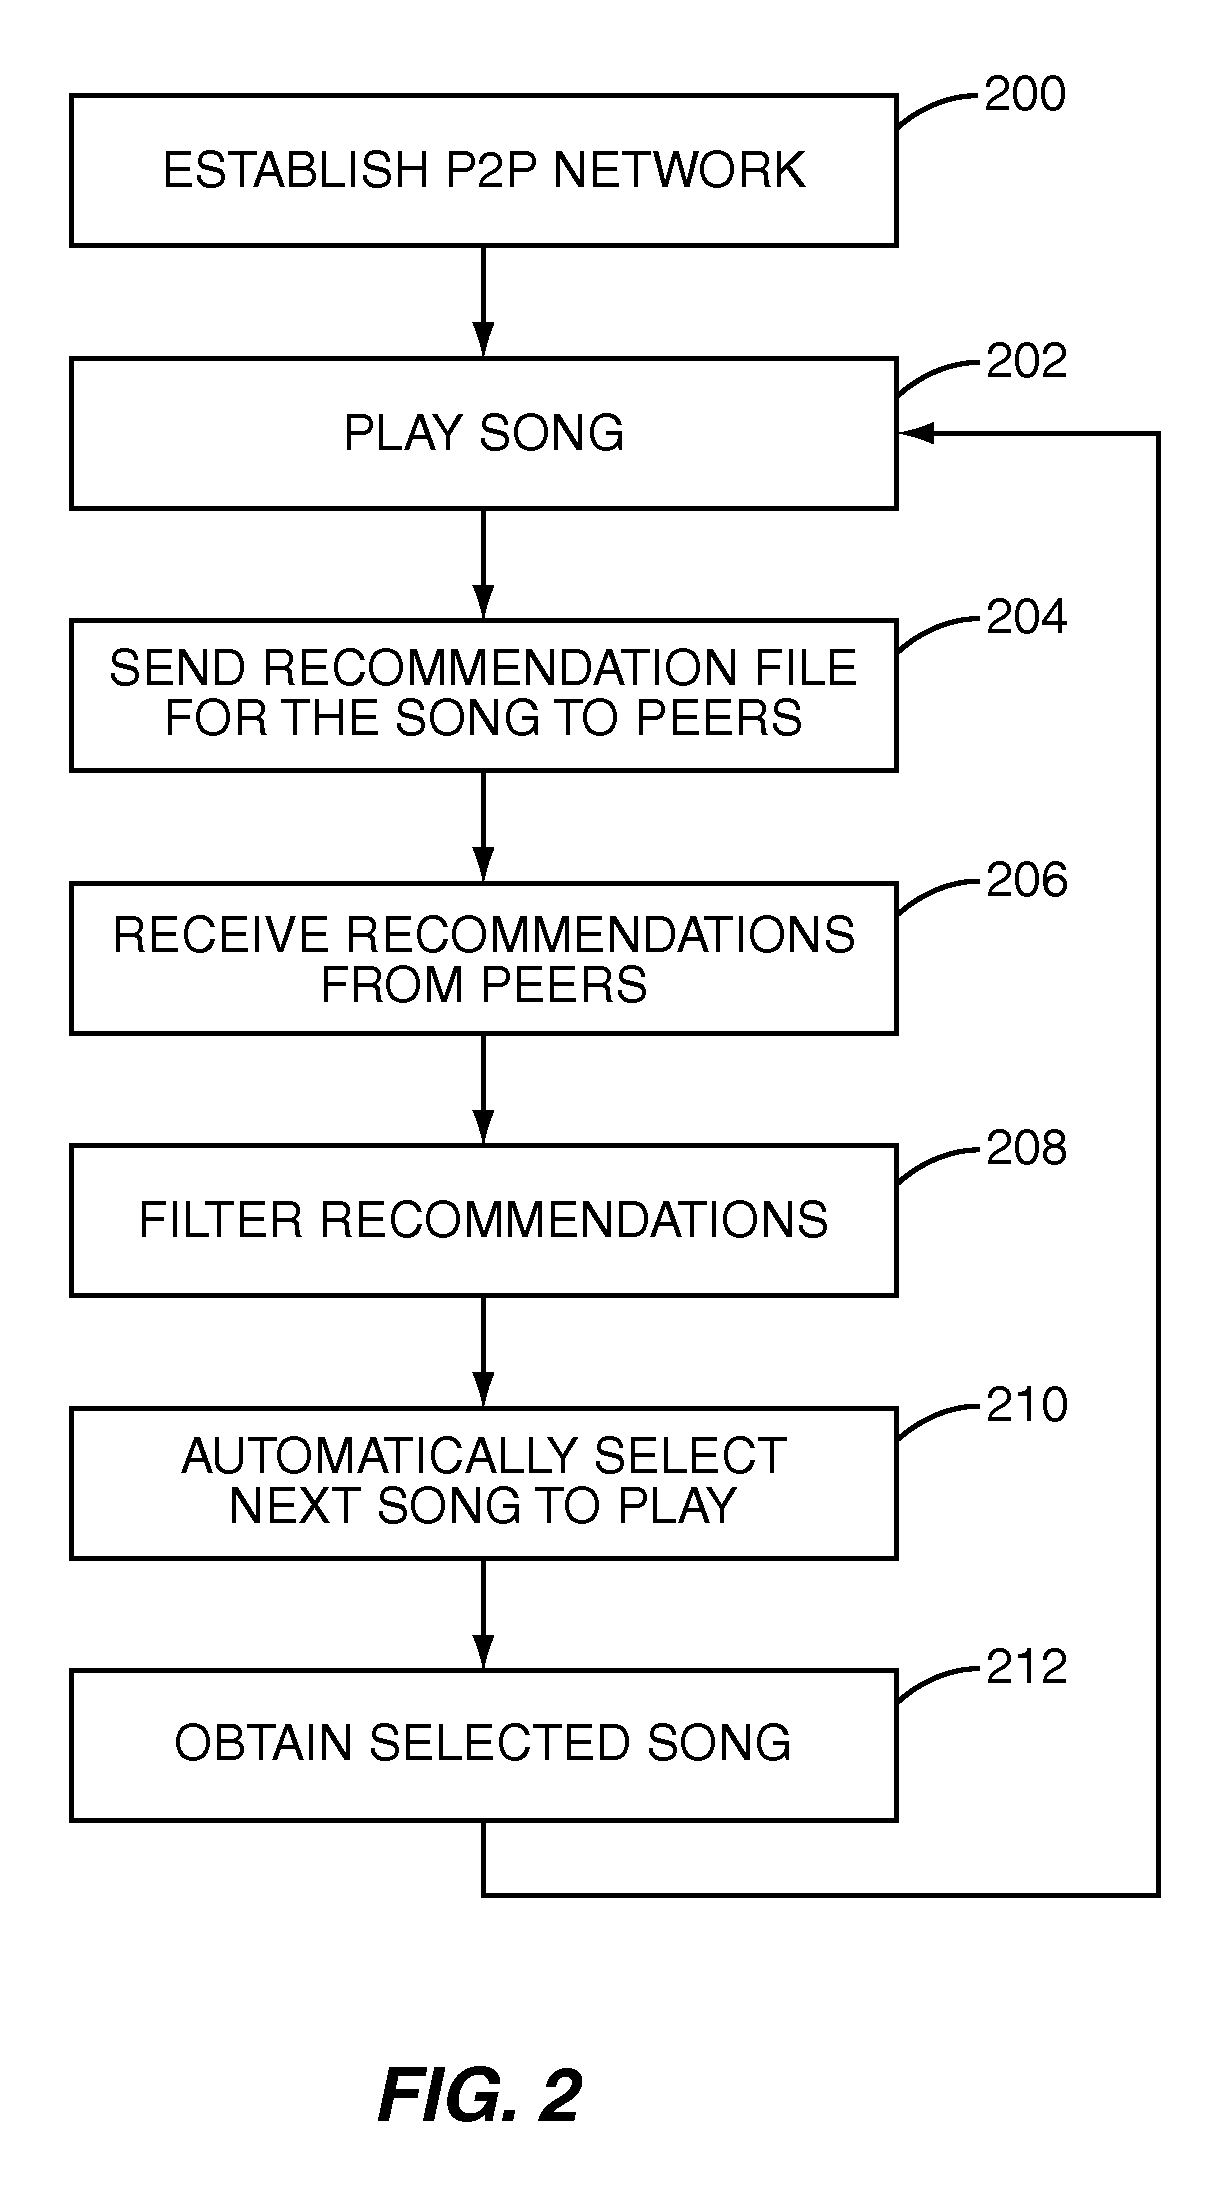 Graphical user interface system for allowing management of a media item playlist based on a preference scoring system